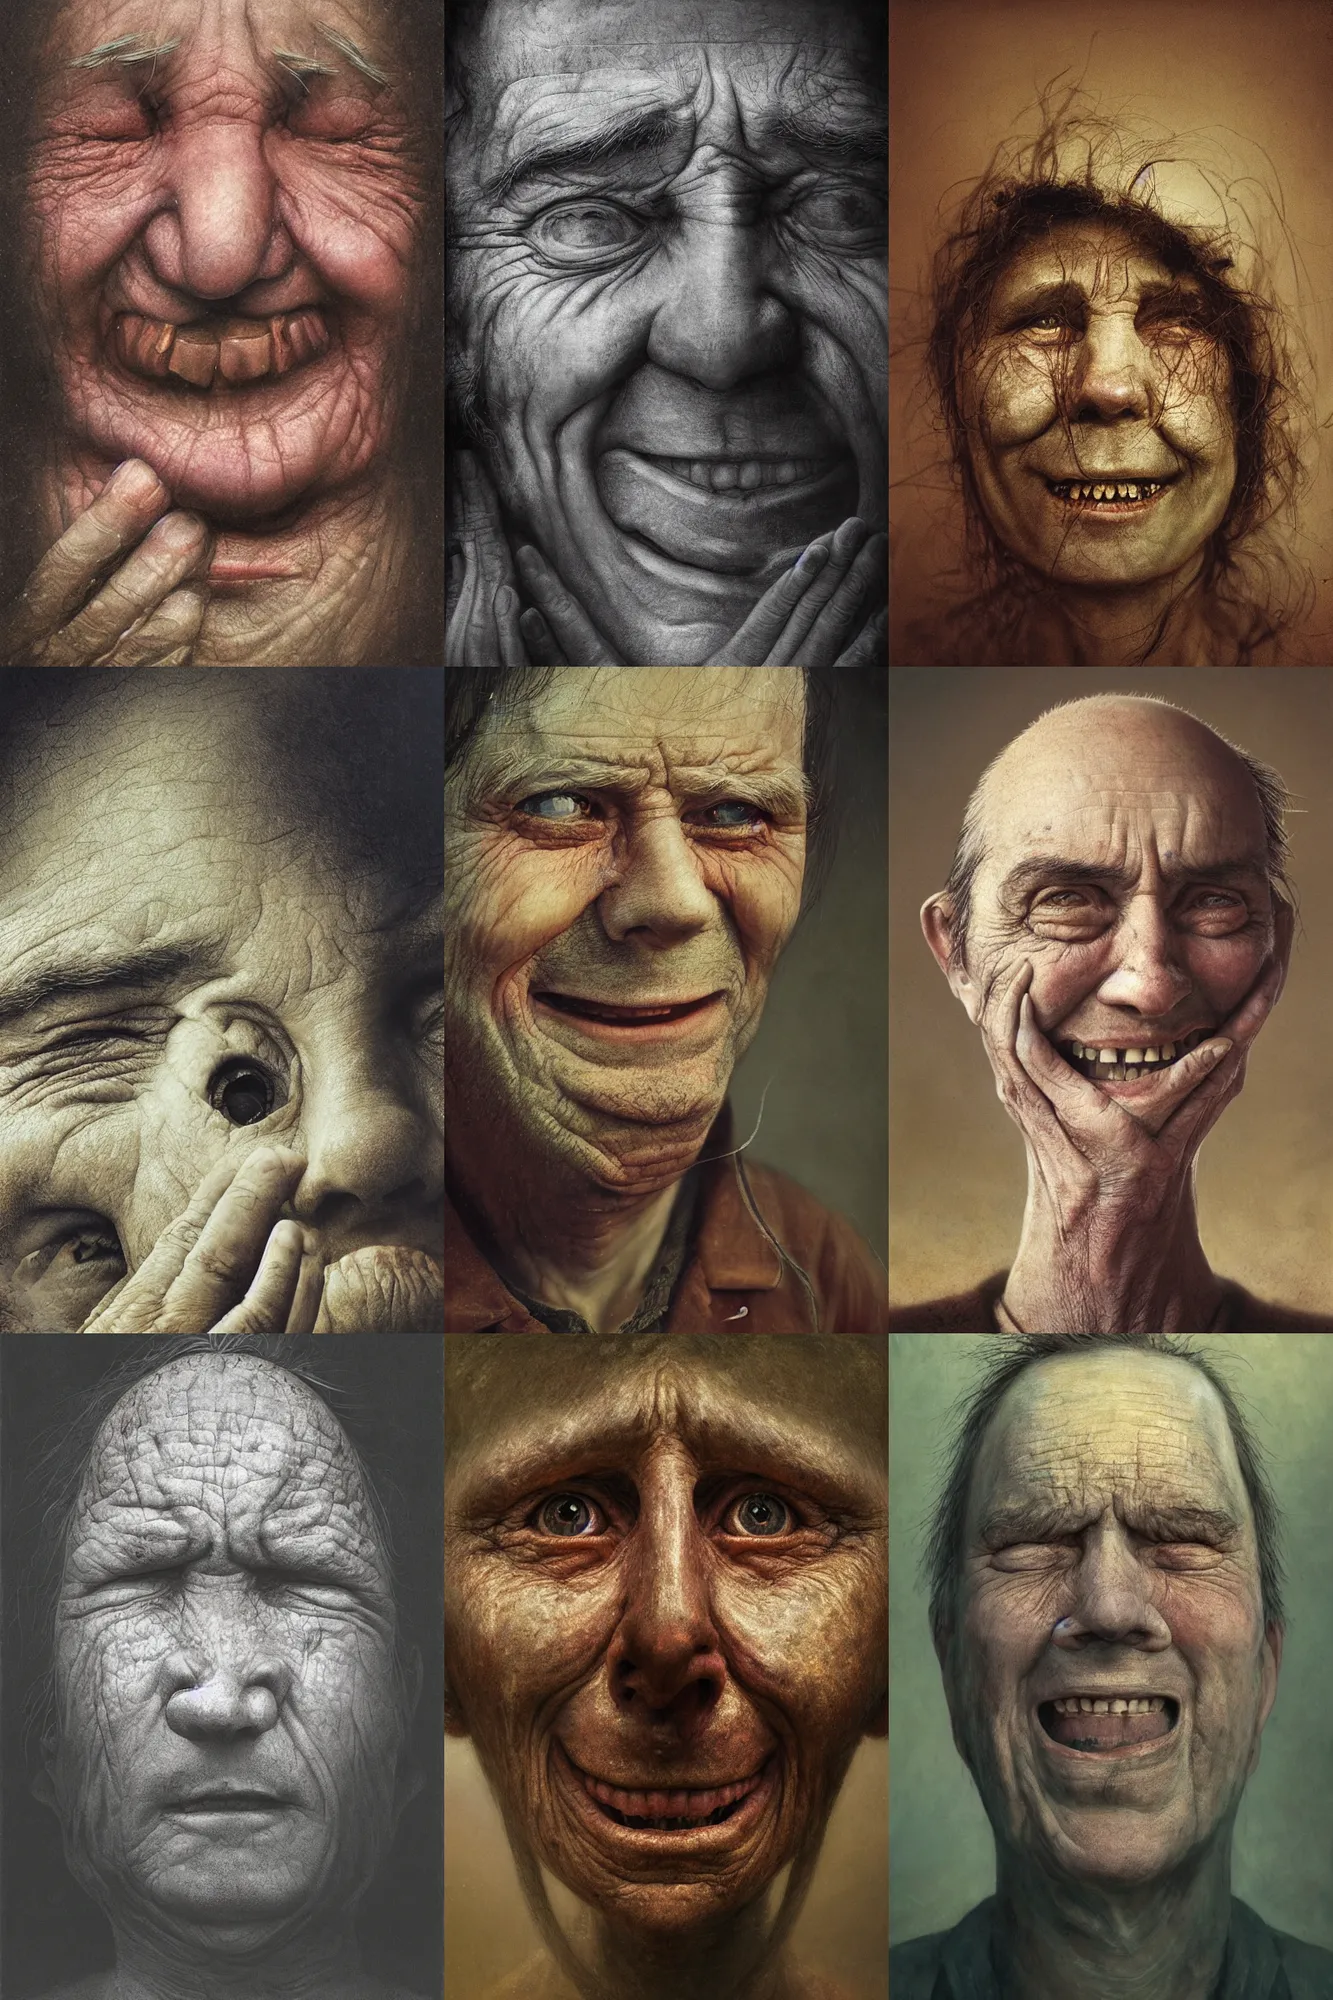 Prompt: close-up face portrait of a human crying and smiling, Les Edwards, Zdzislaw Beksinski, Carl Gustav Carus, John Harris, Michal Karcz, Zhang Kechun, Mikko Lagerstedt, Scott Listfield, Steven Outram, Jessica Rossier